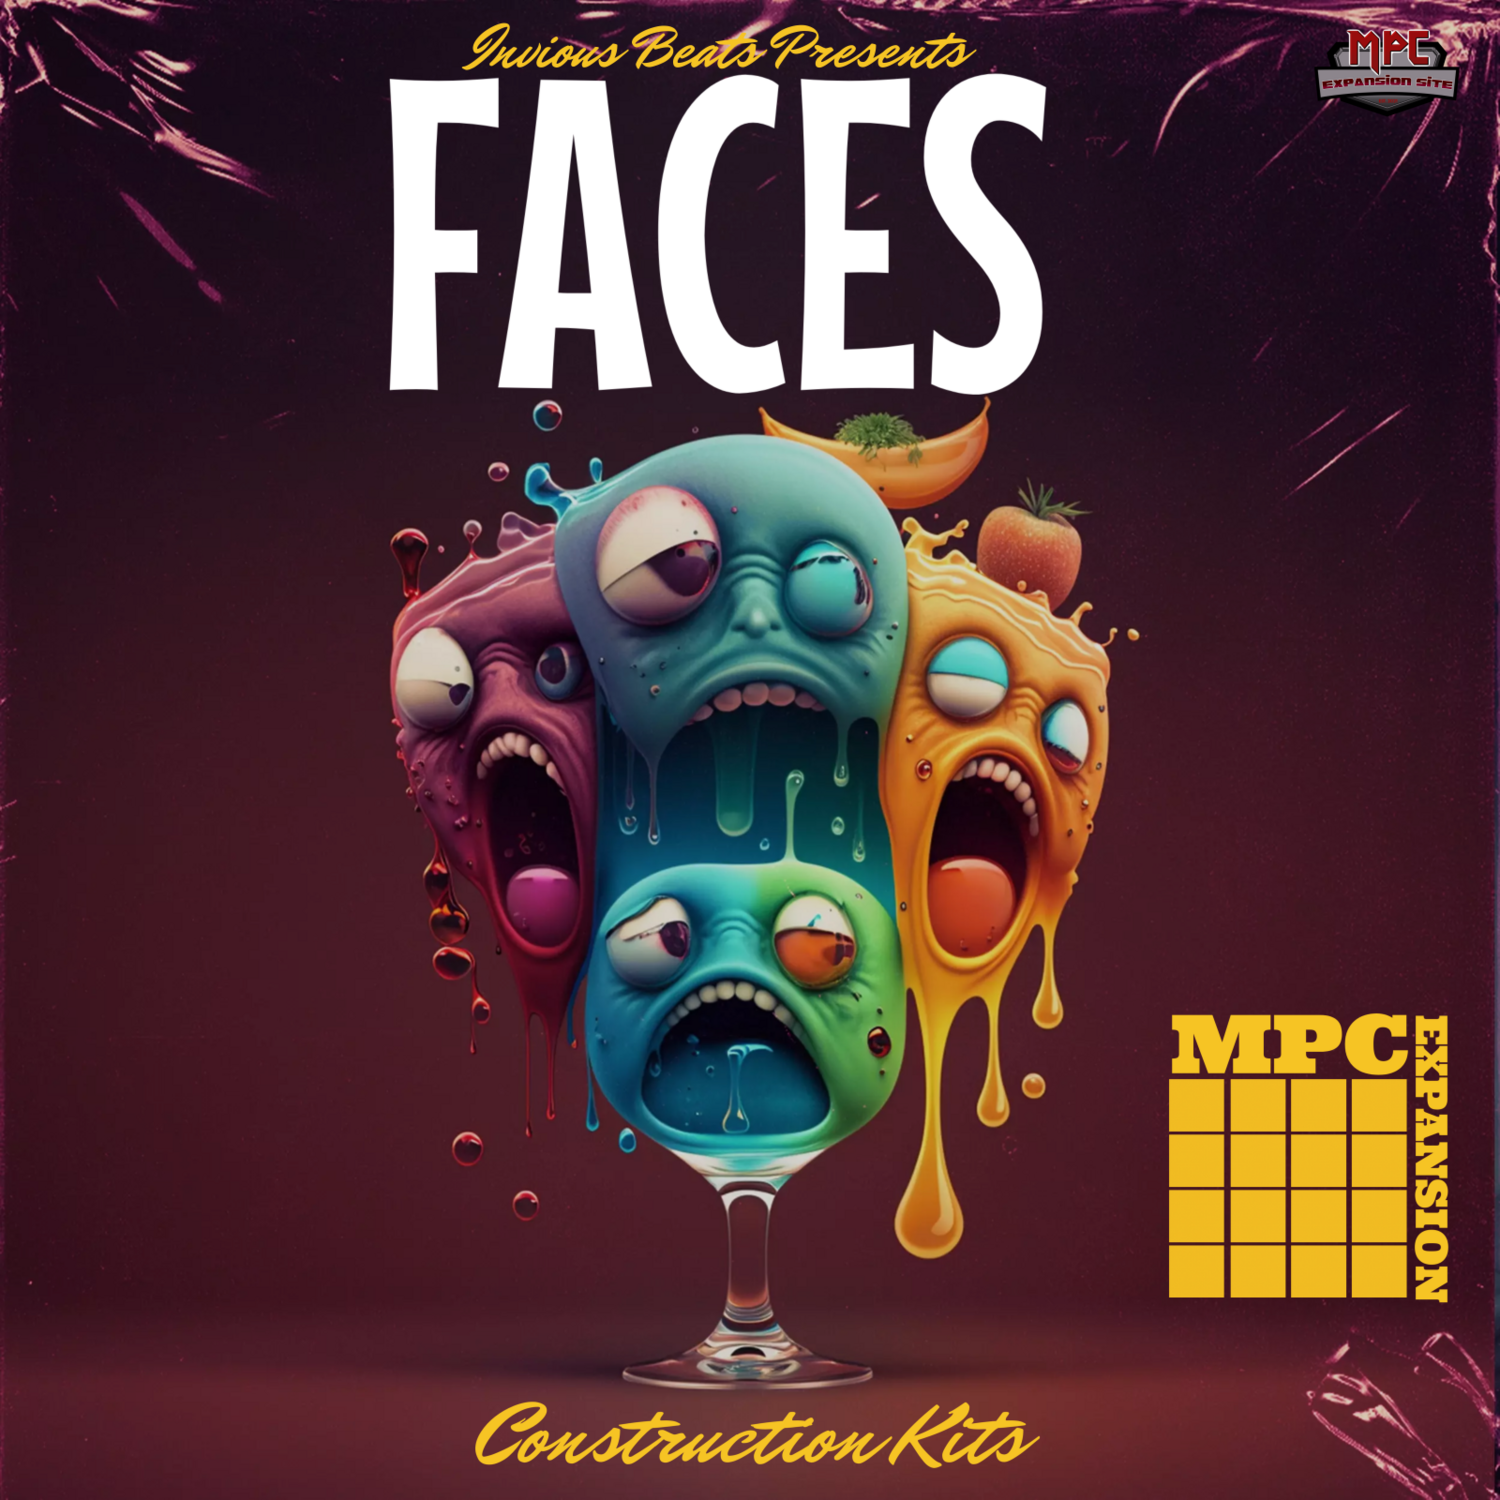 MPC EXPANSION 'FACES' by INVIOUS